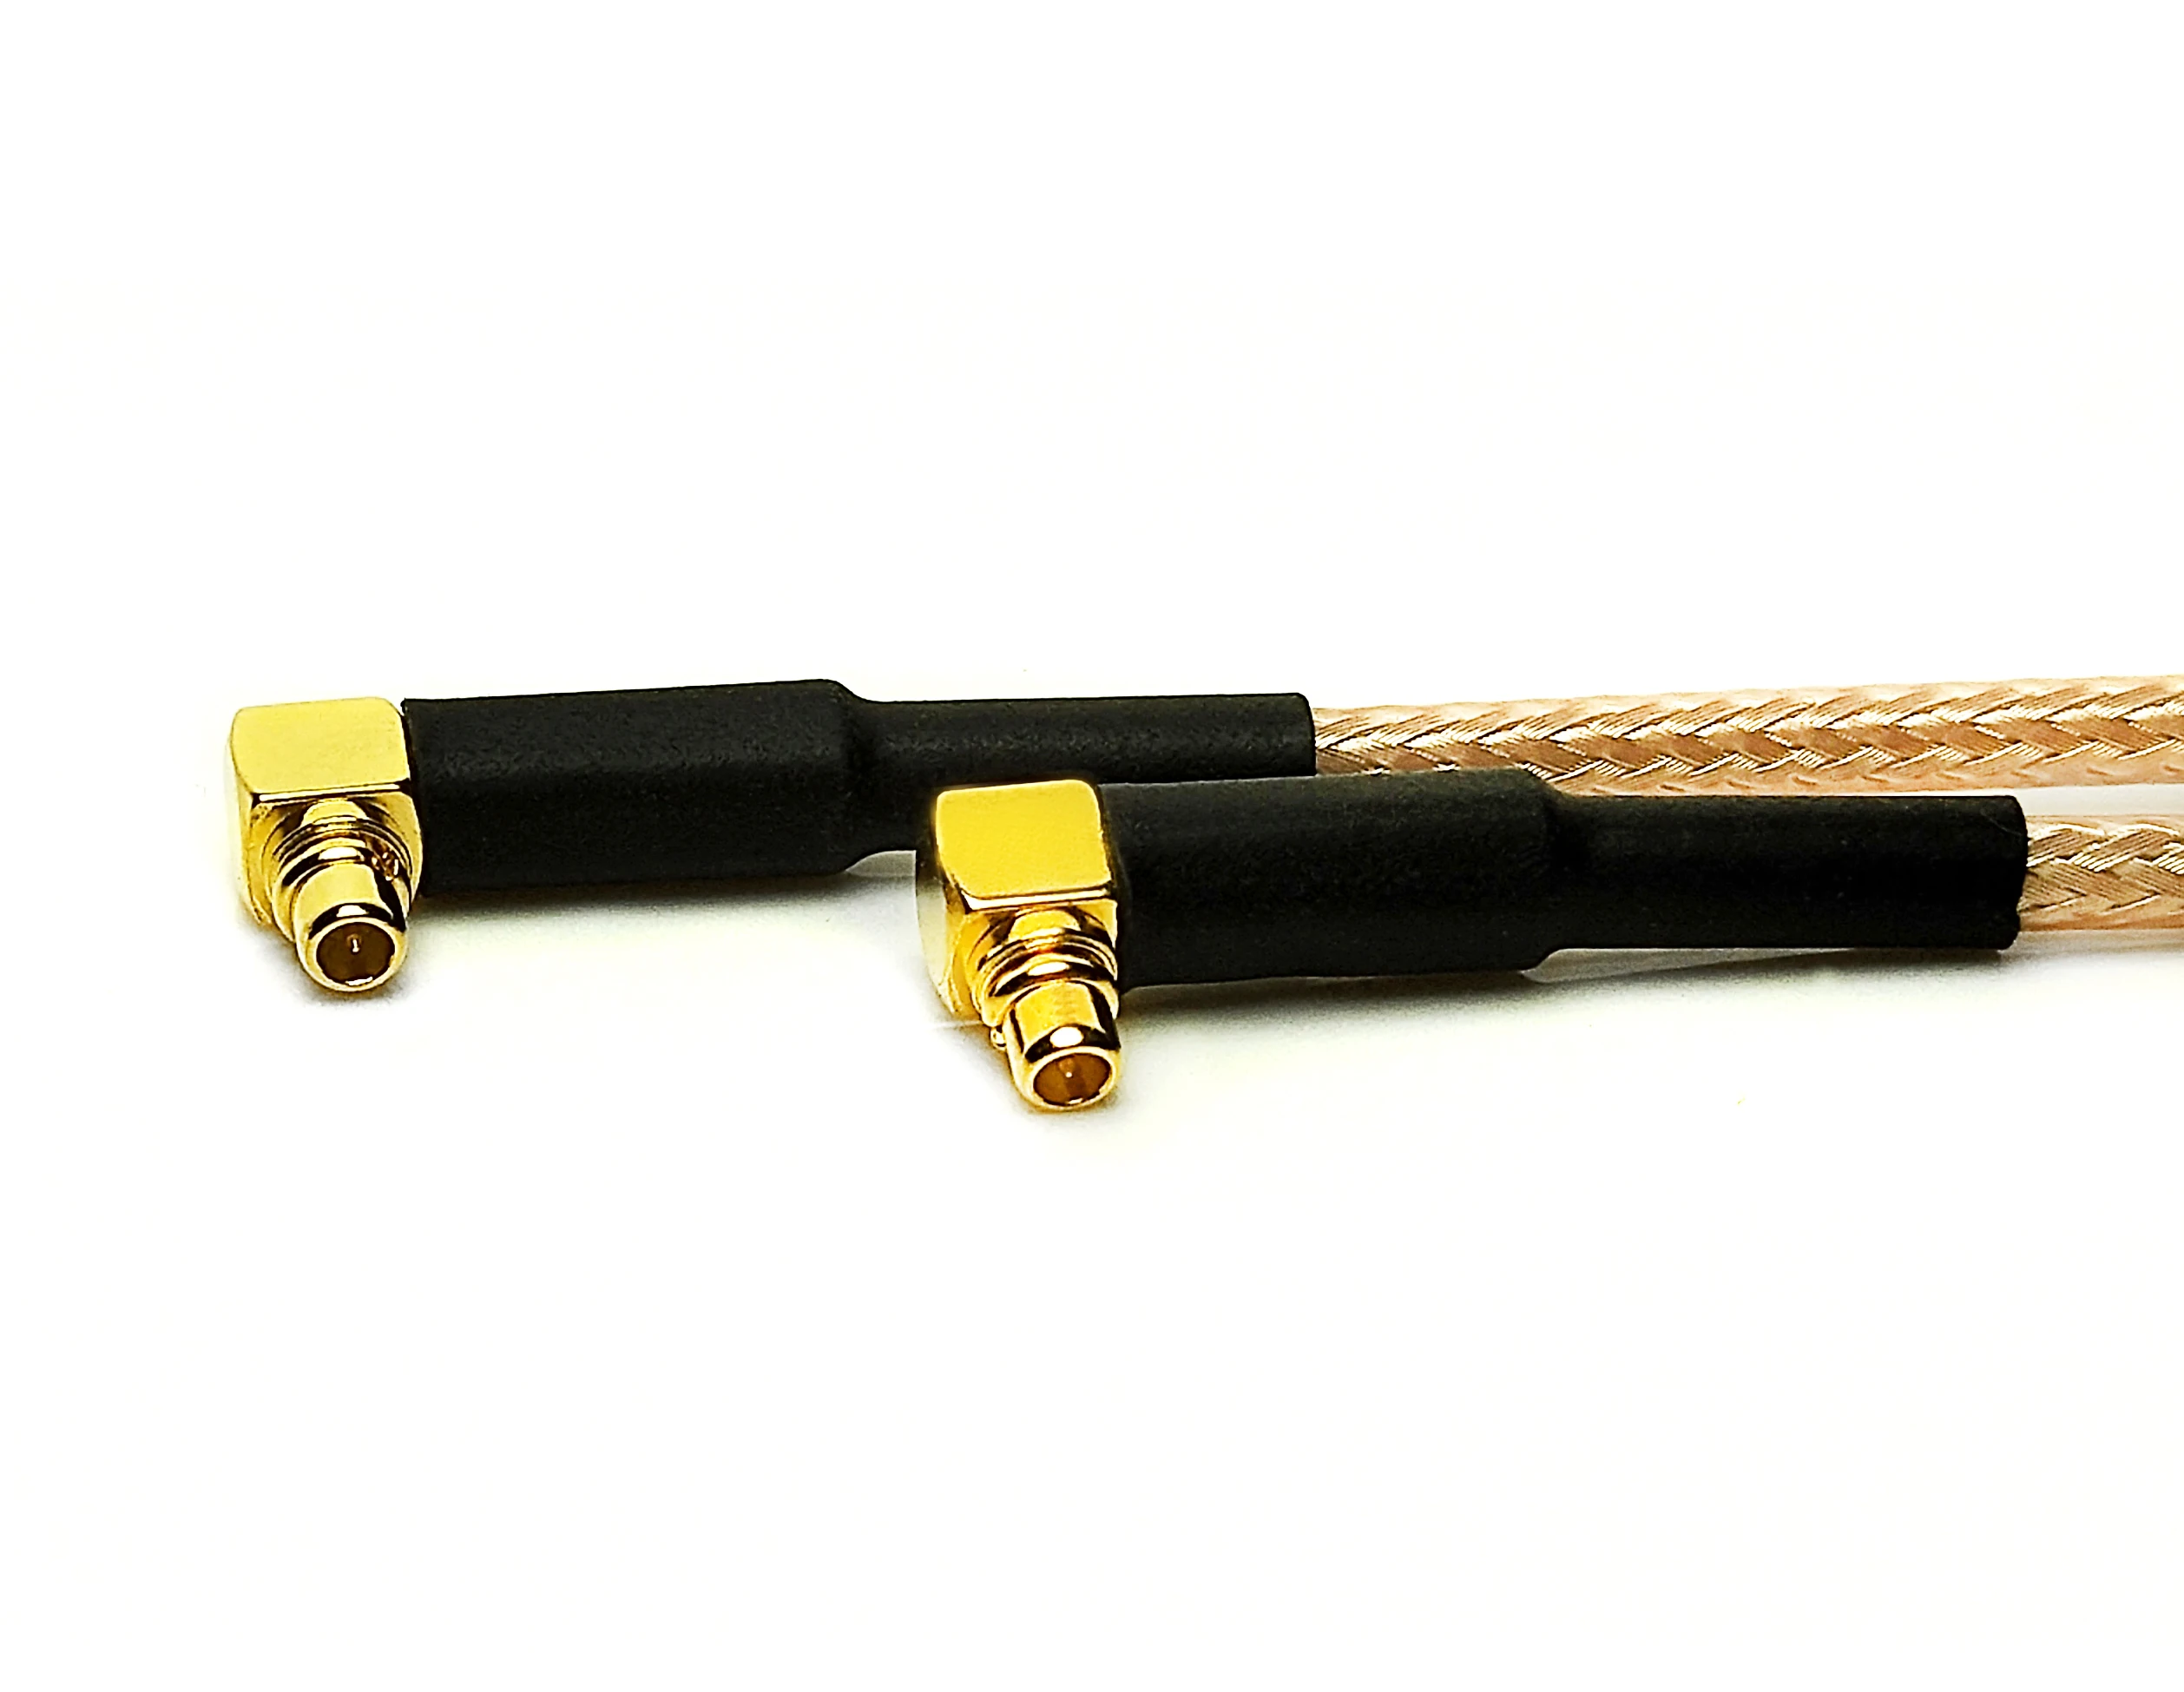 sma female Jack bulkhead  connectors to MMCX male right angle elbow 90 degree rg316 jumper cable assembly manufacture